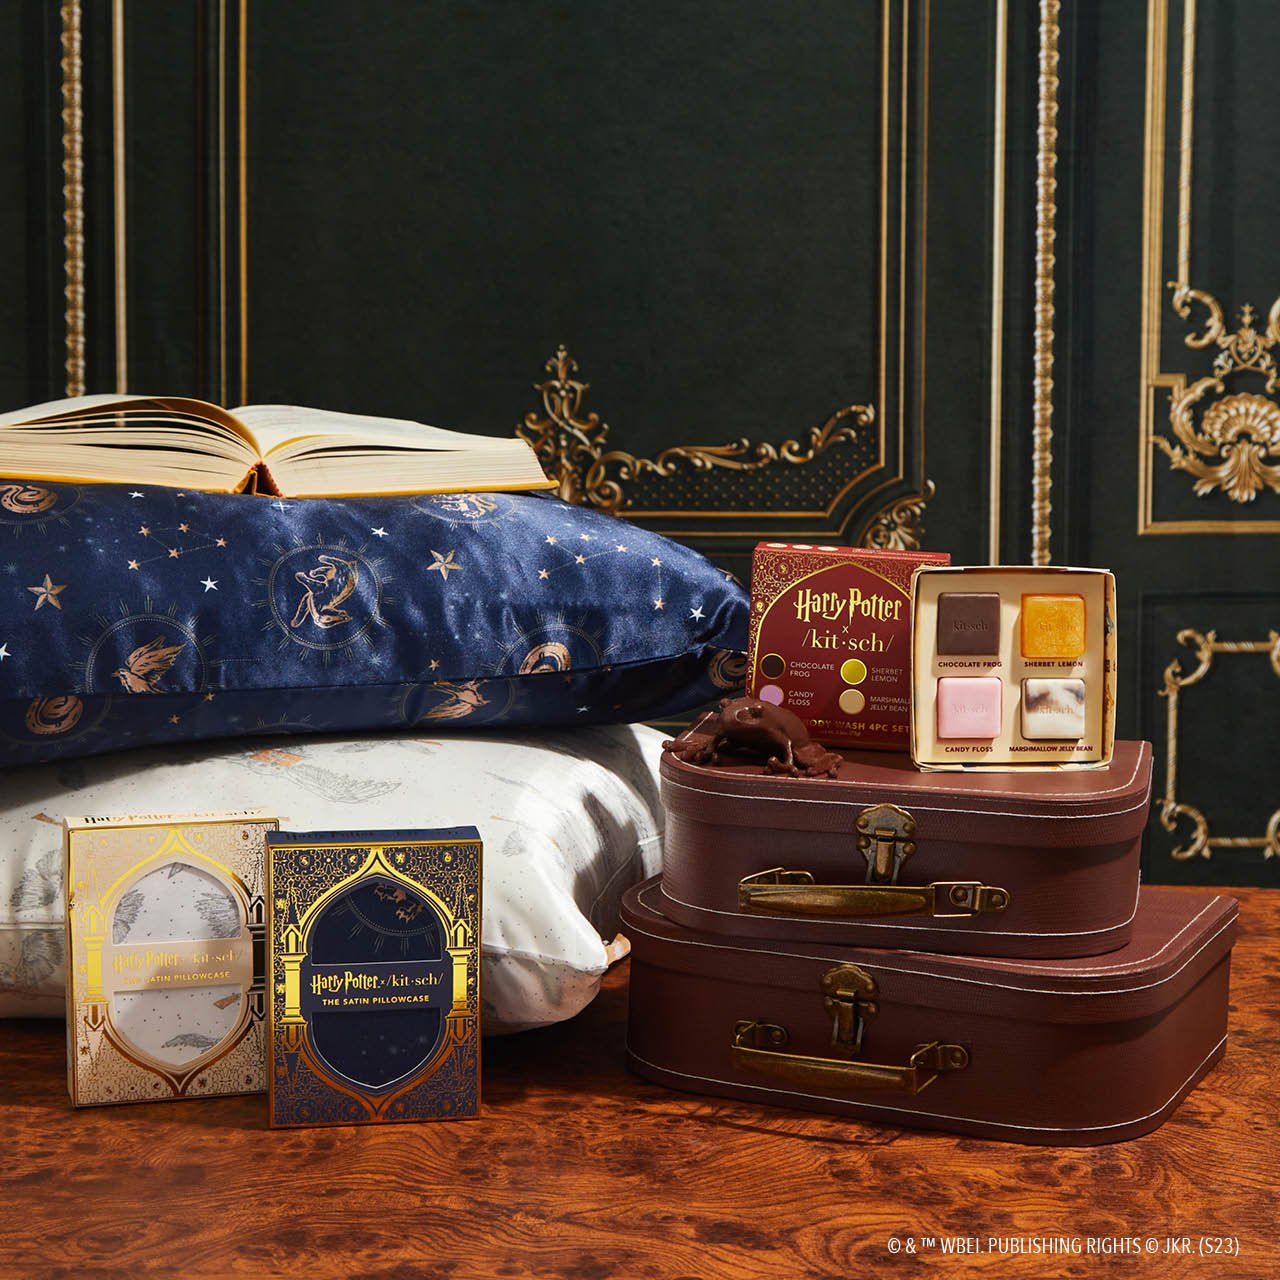 Harry Potter x Kitsch King Collector's Bundle